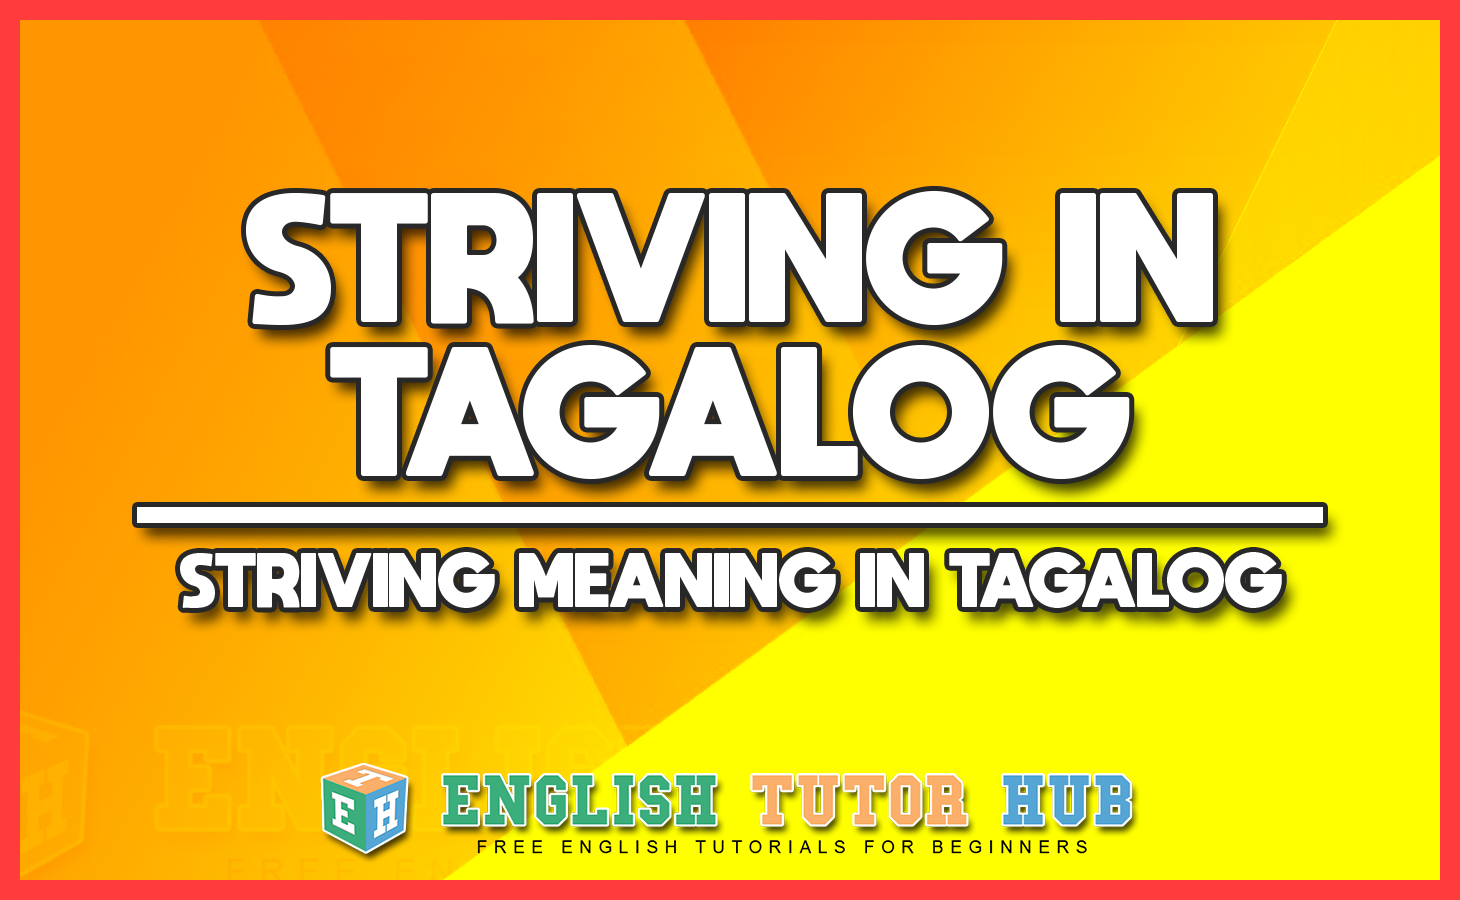 STRIVING IN TAGALOG - STRIVING MEANING IN TAGALOG